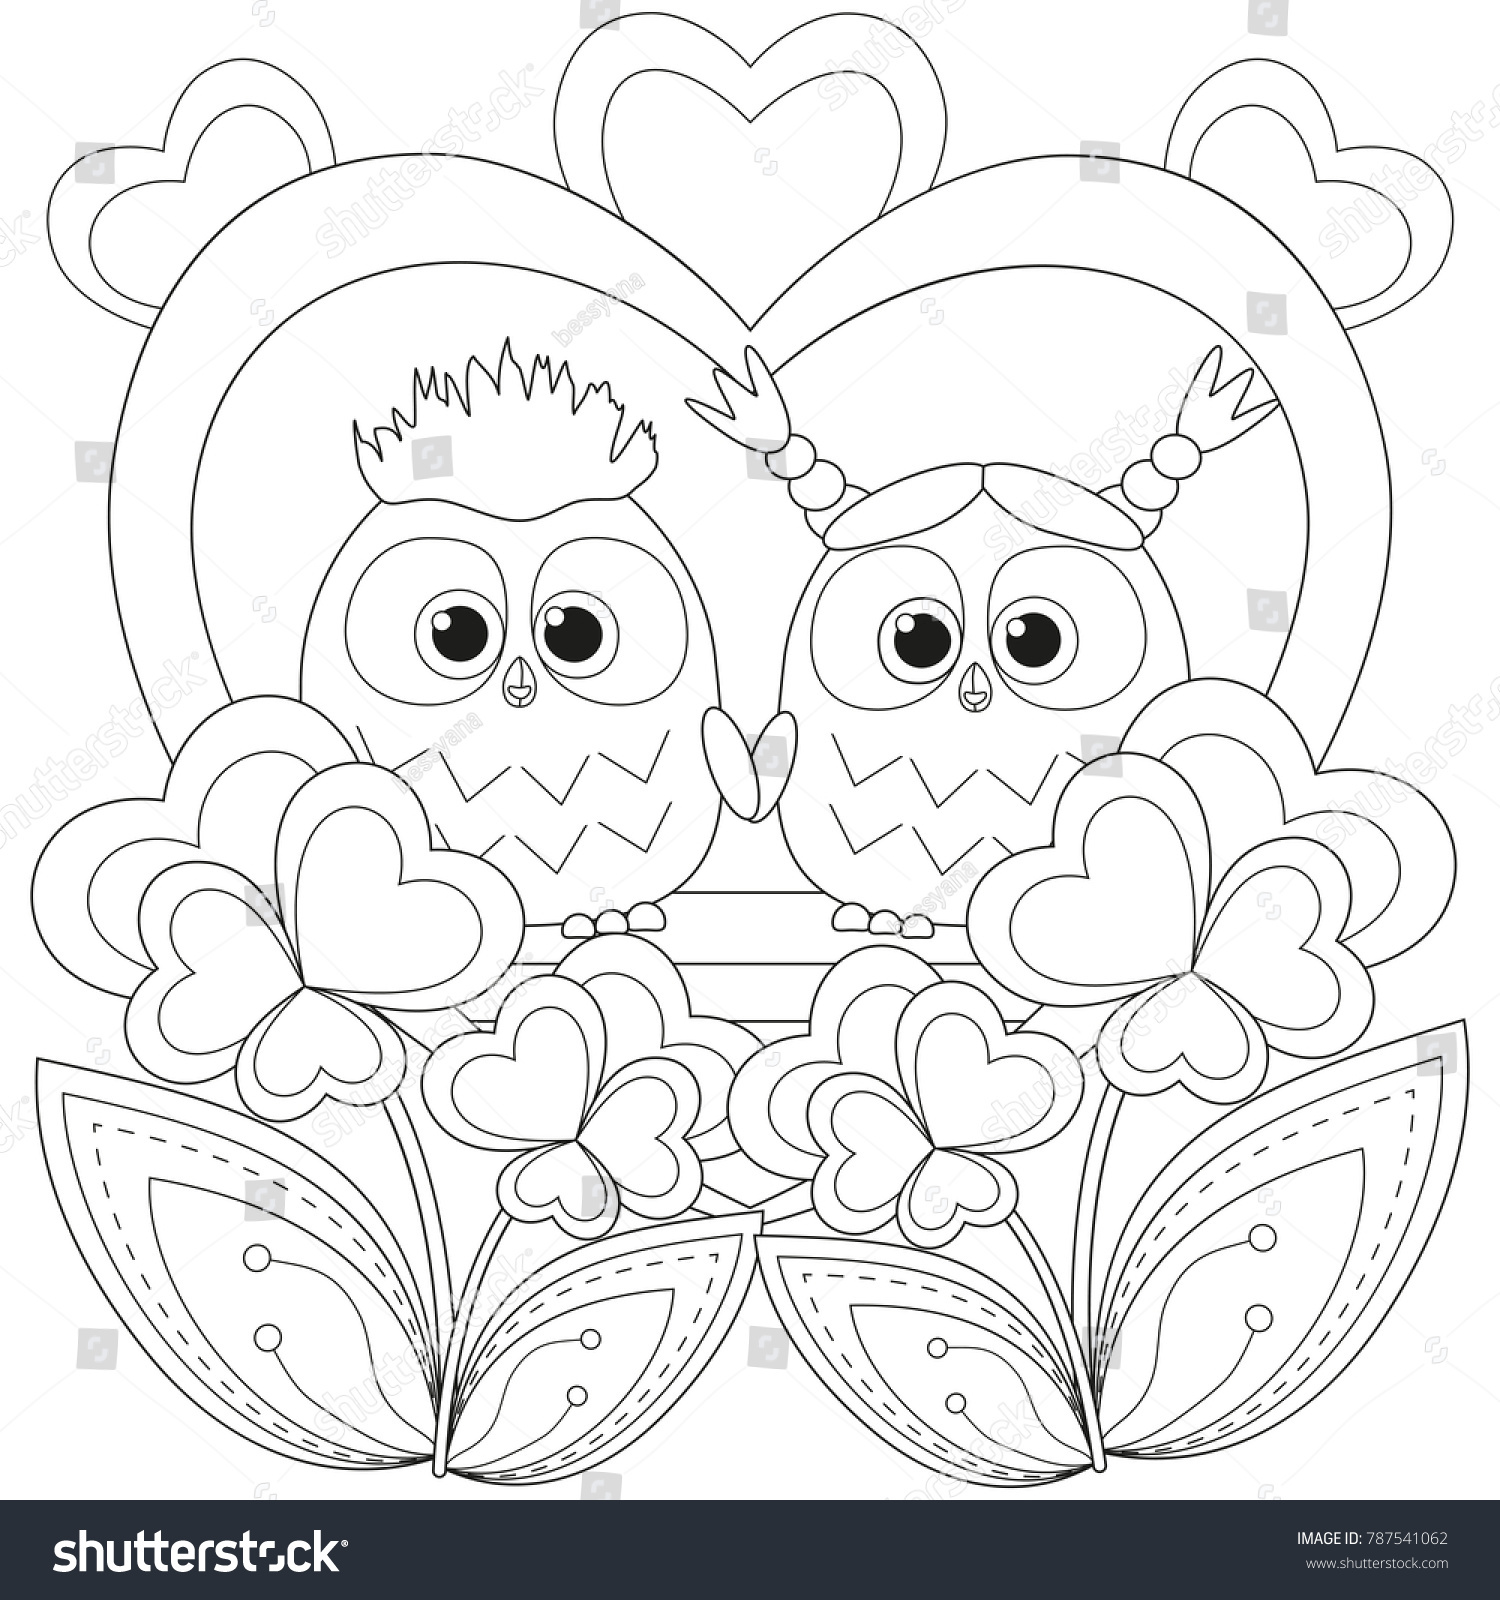 Valenitne Coloring Pages at GetDrawings | Free download